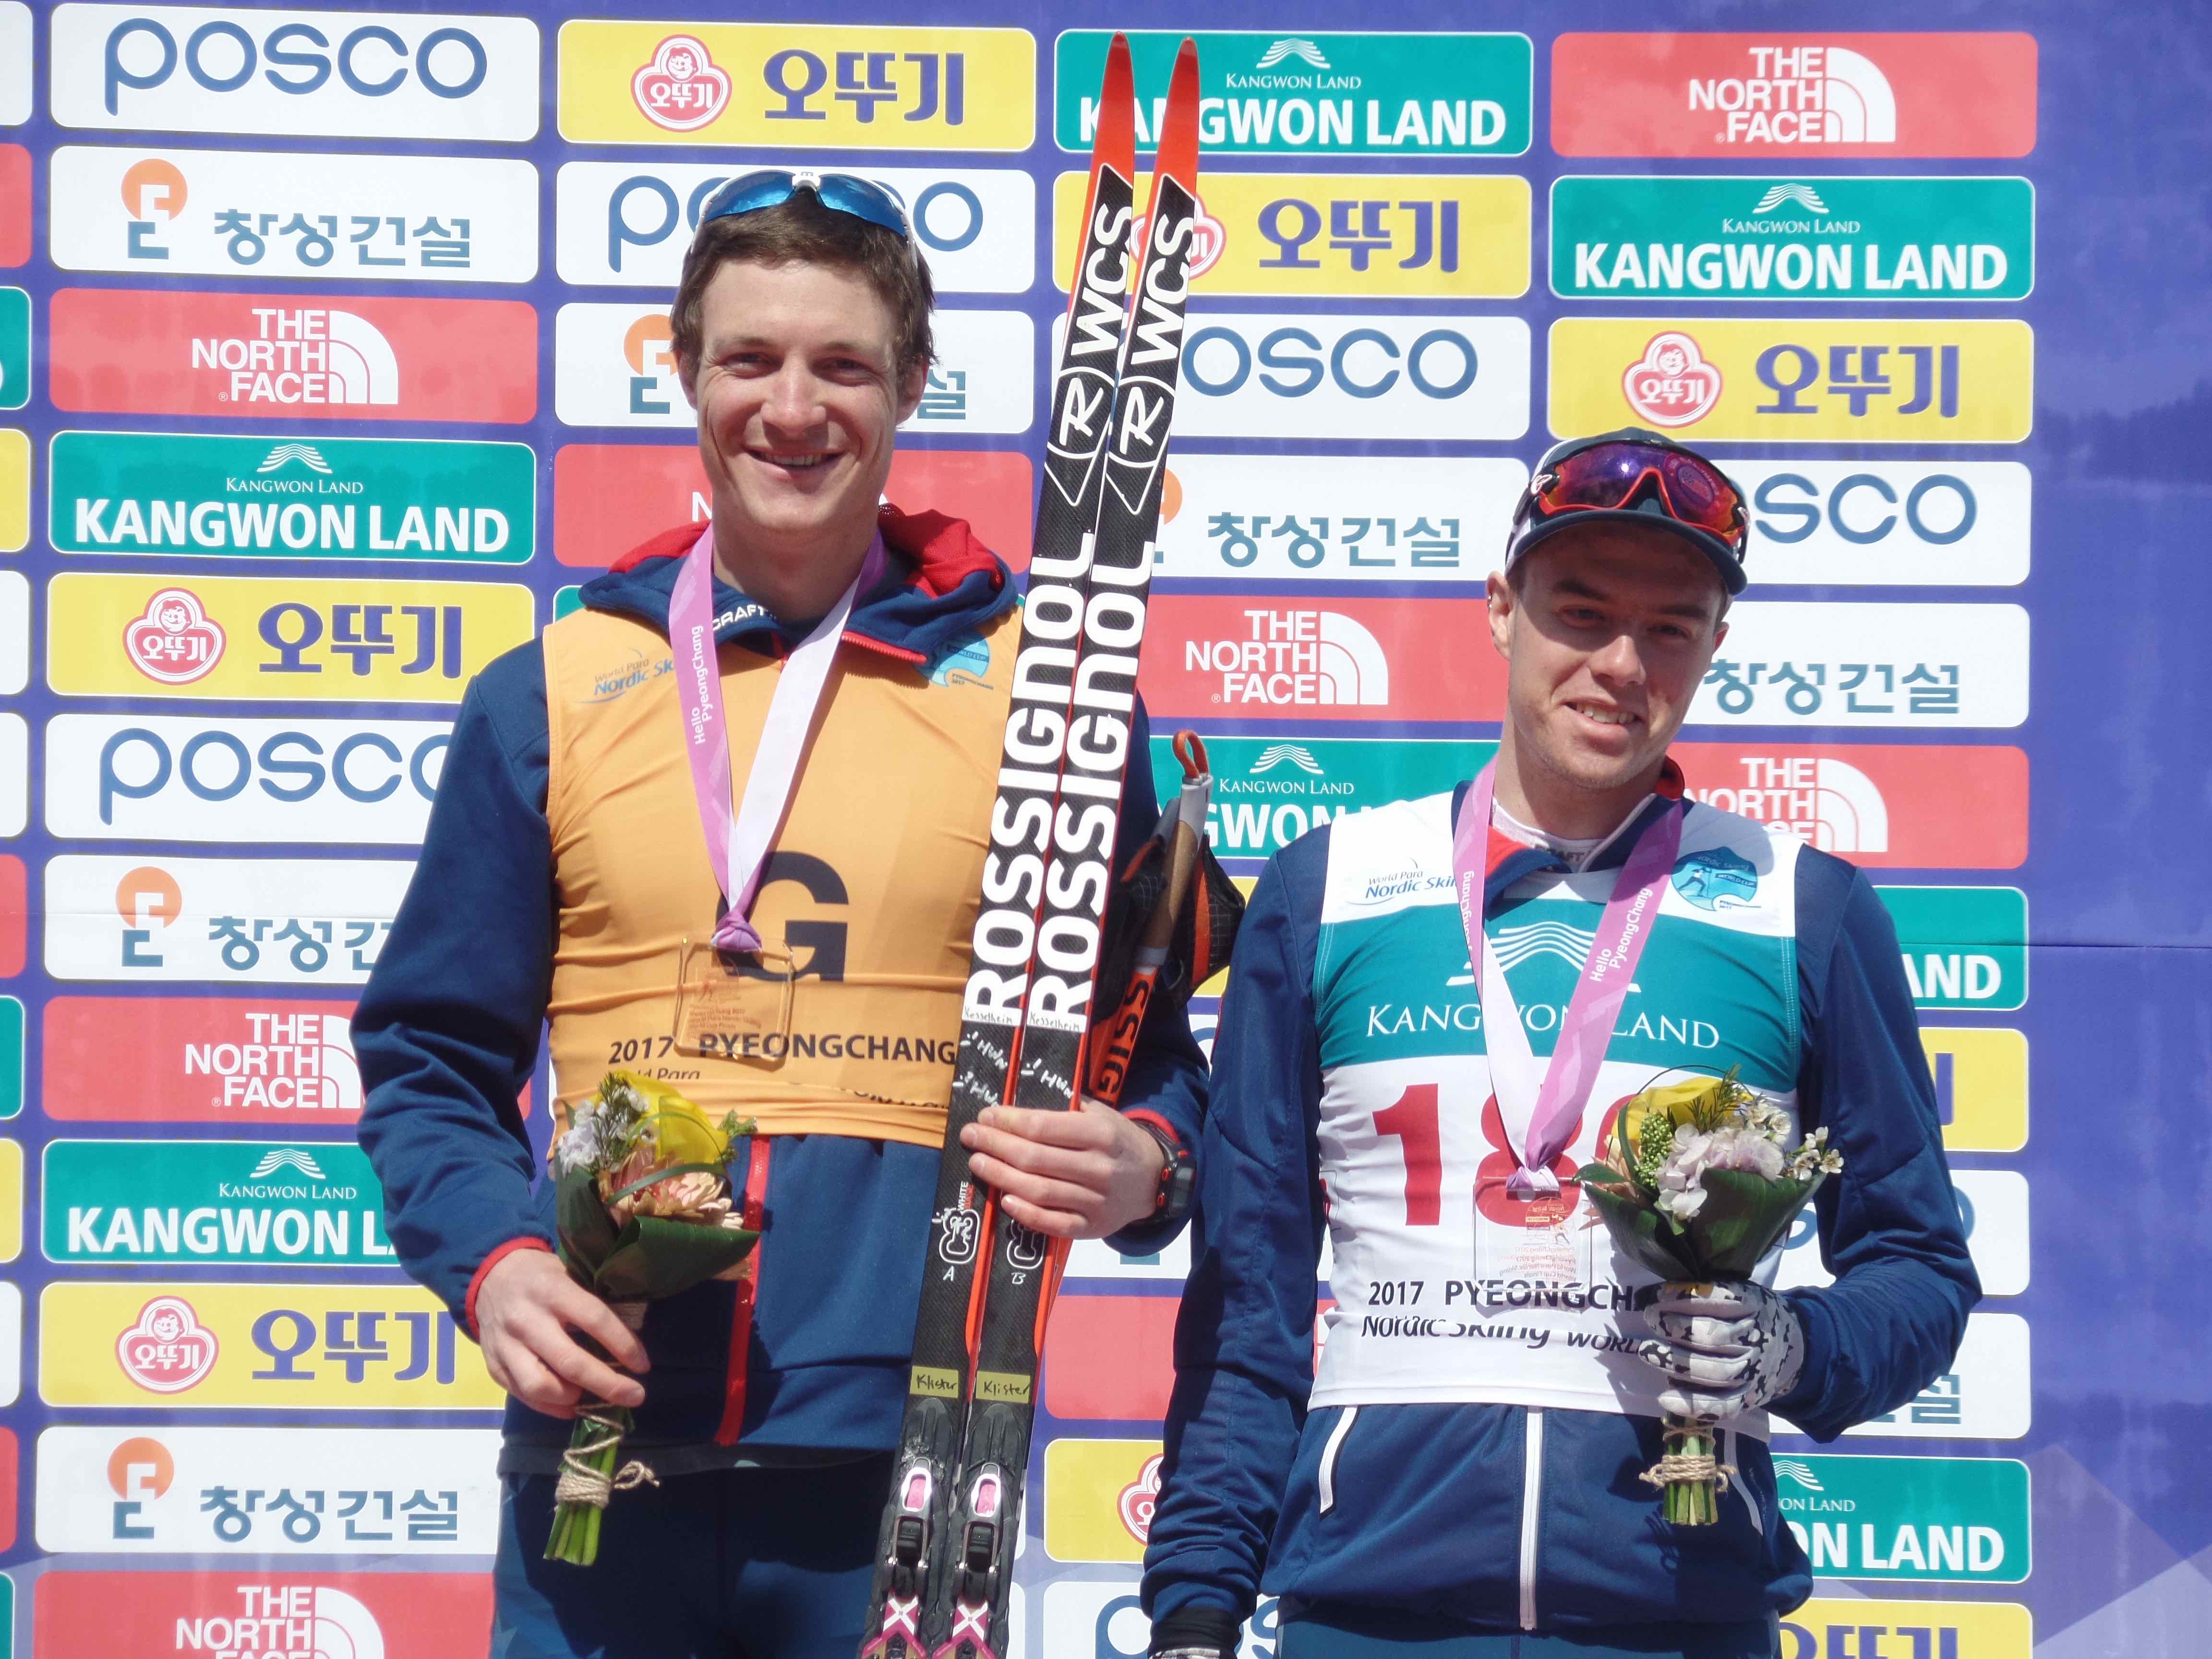 Jake Adicoff '18 (right) at the PyeongChang 2018 Test Event and World Cup winners podium with guide Sawyer Kesselheim. Photo: US Para Nordic Team Director John Farra